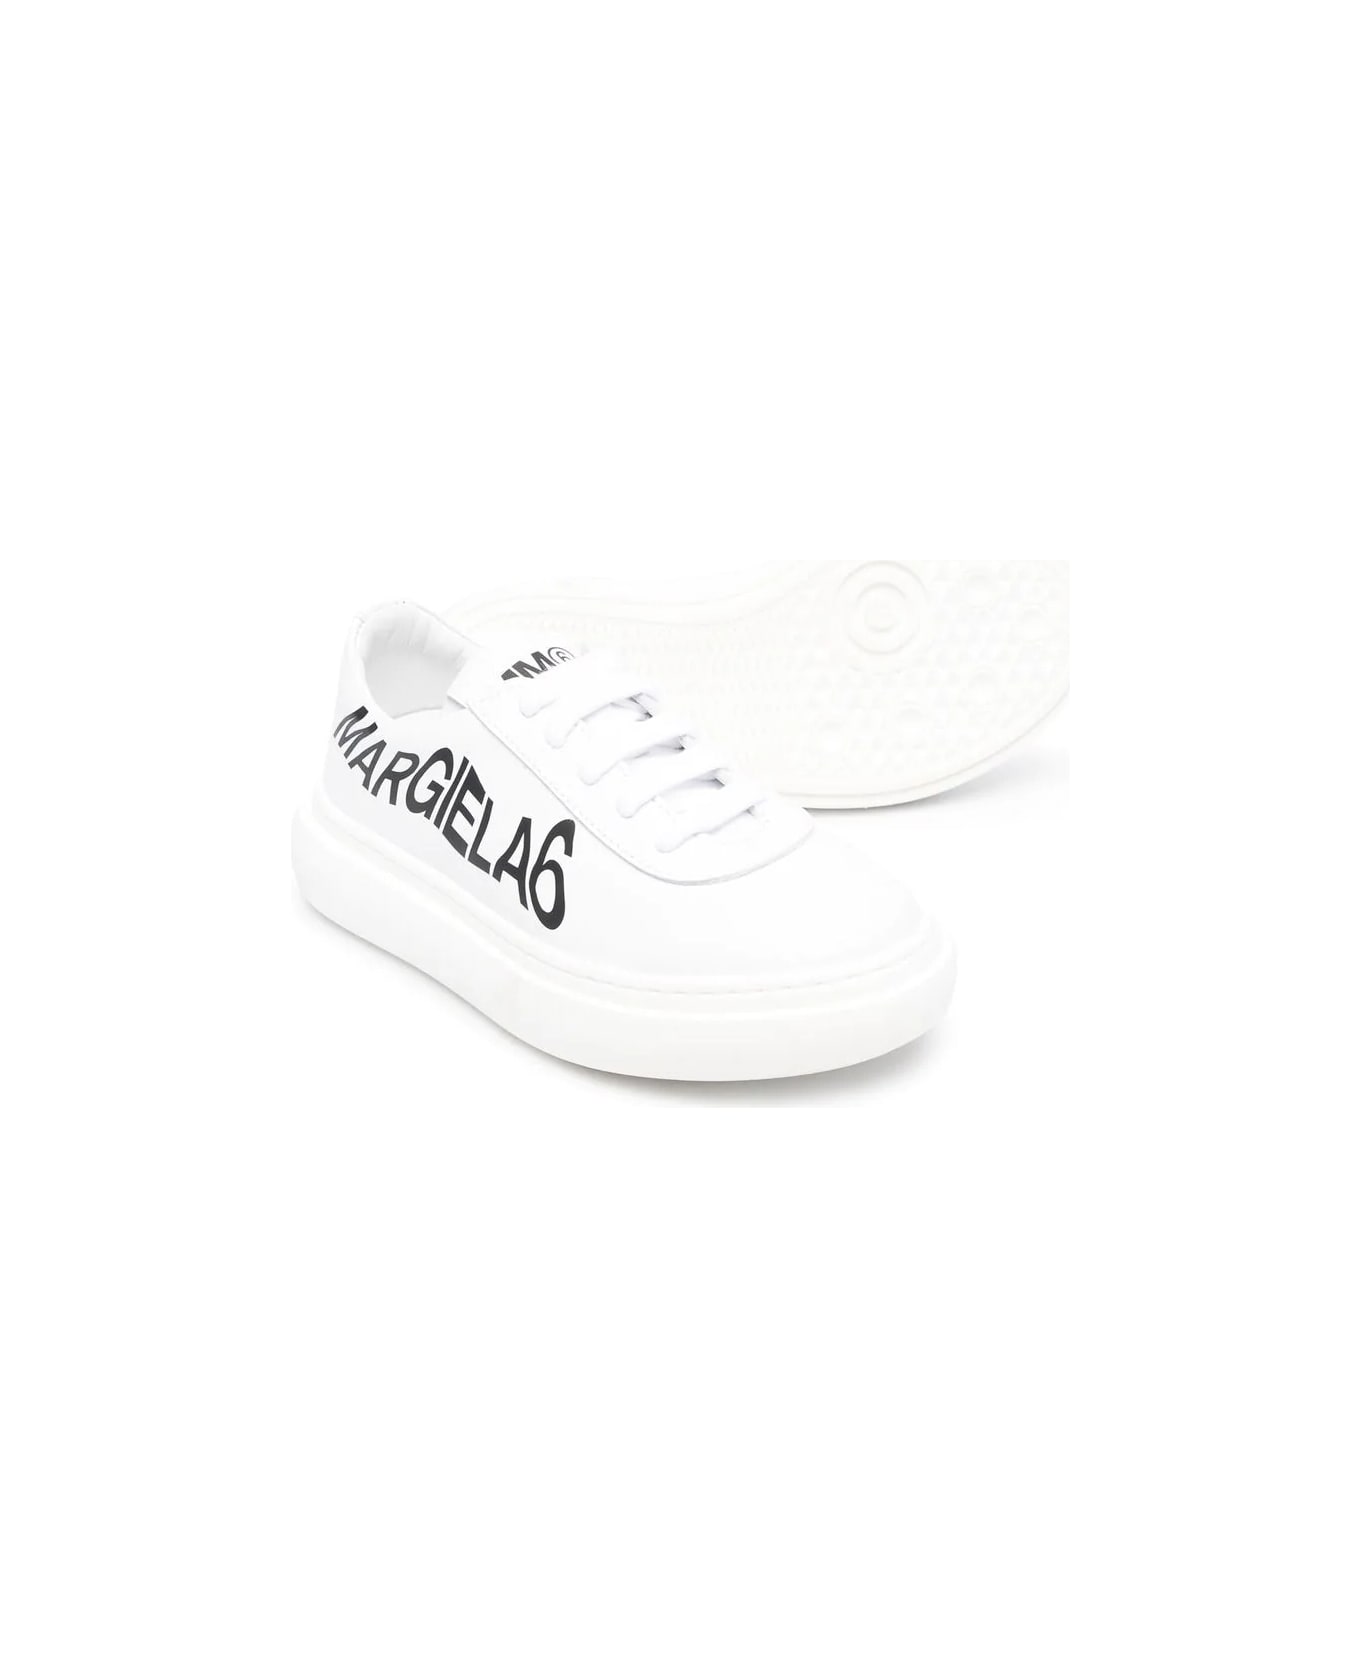 MM6 Maison Margiela Sneakers With Print - White シューズ